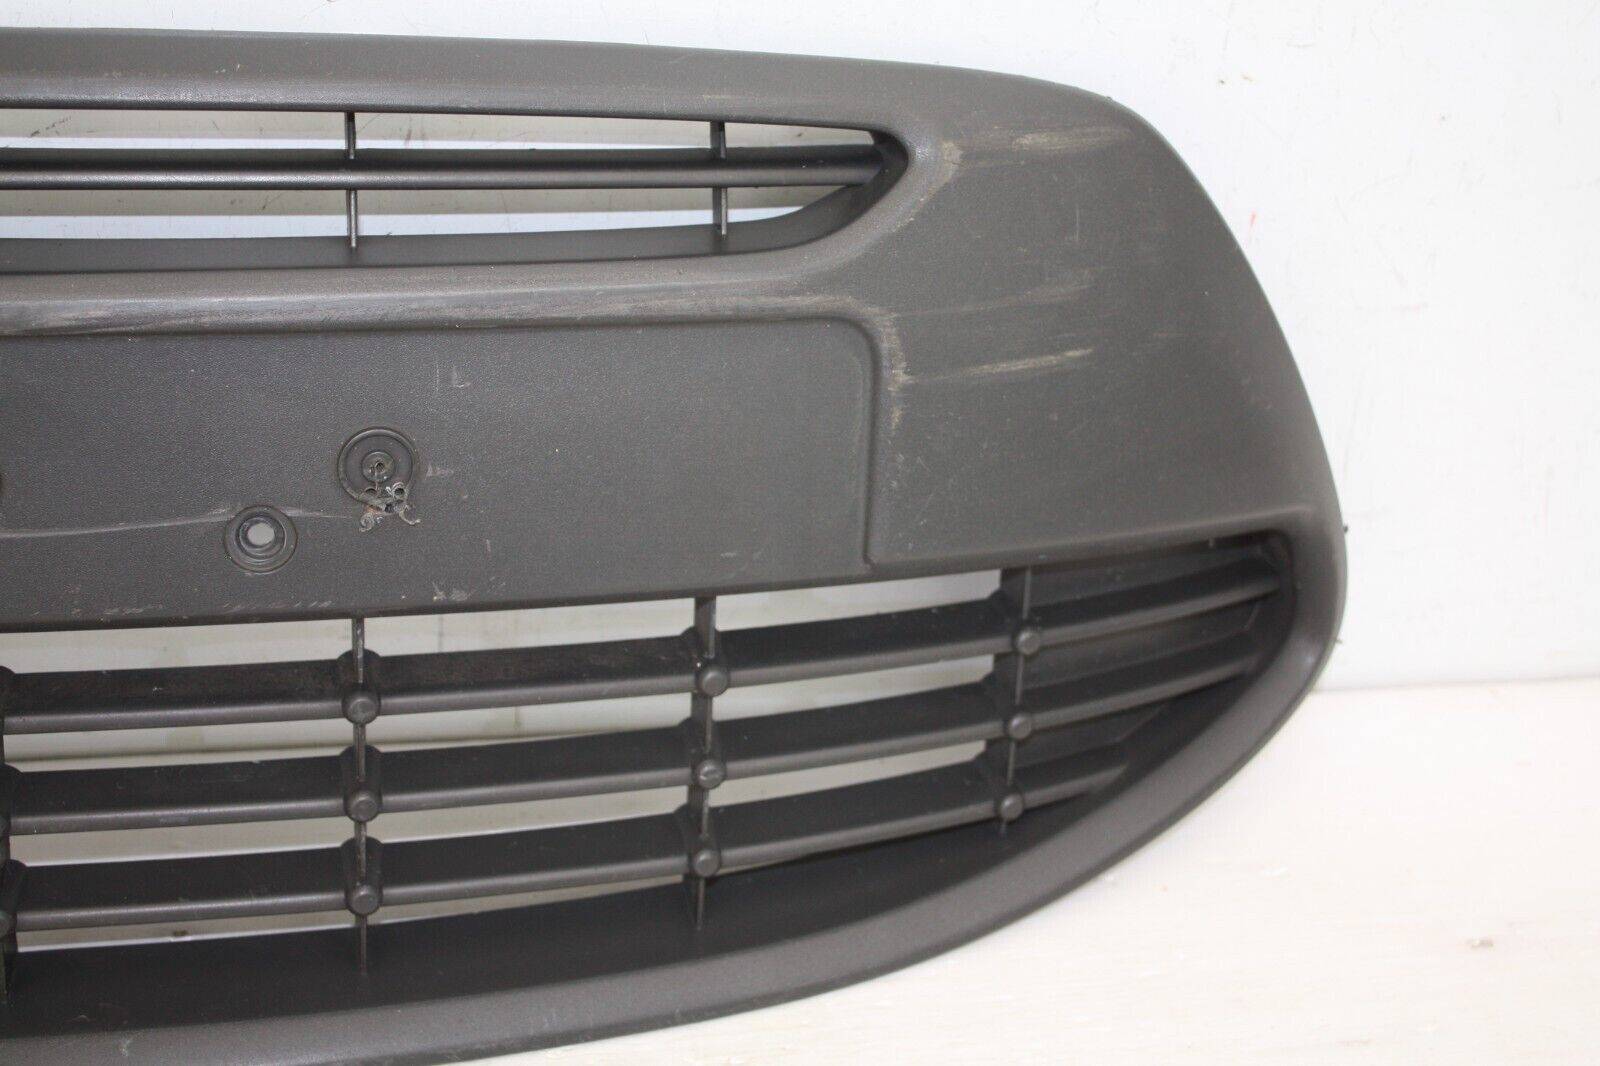 Ford-KA-Front-Bumper-Grill-2009-TO-2016-735437417-Genuine-GOT-DEEP-SCRATCHES-175720937010-4